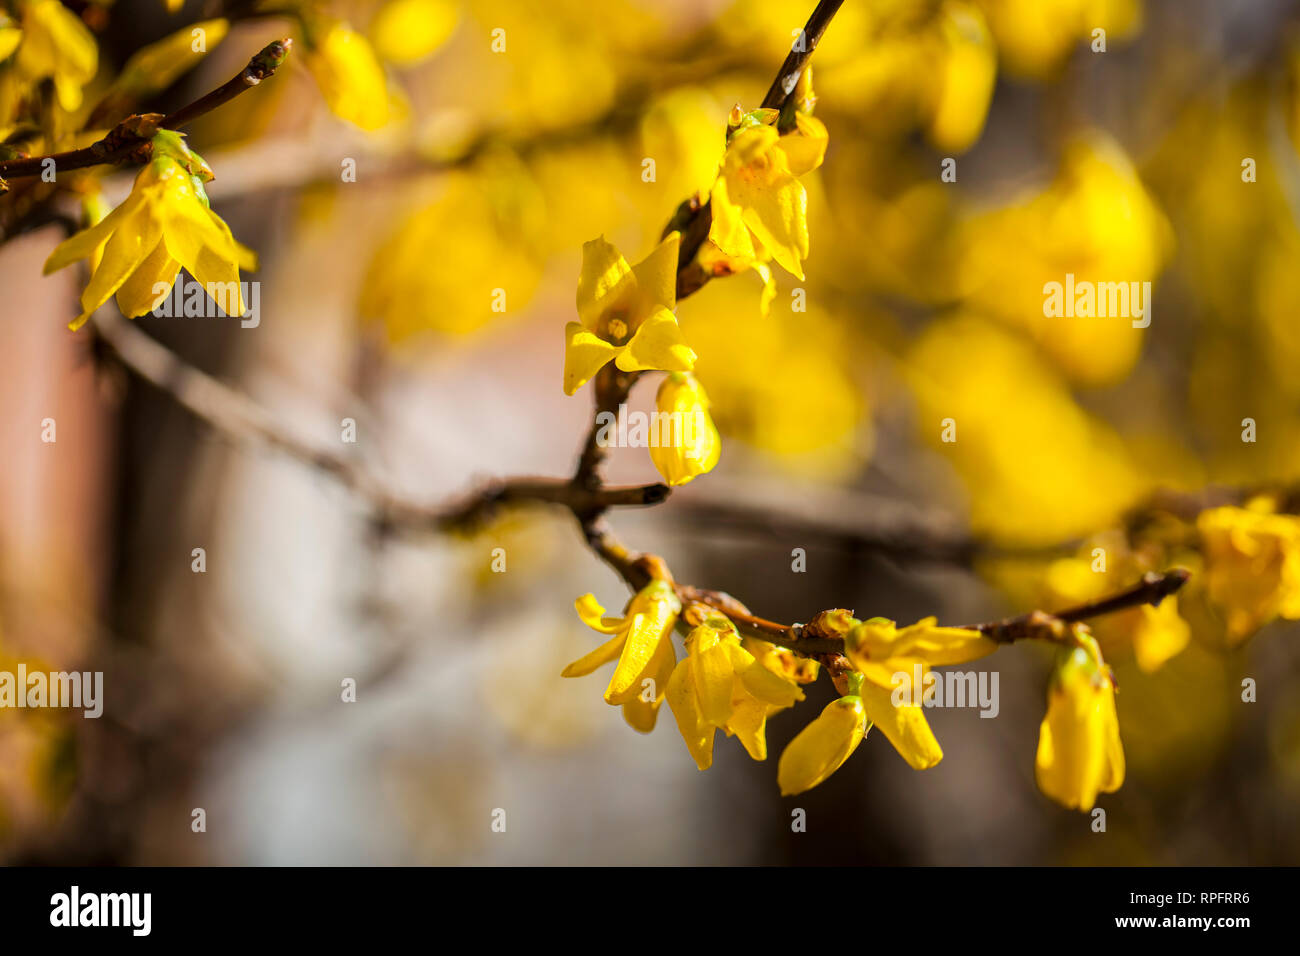 Yellow flowers on the branch in the autumn. Flowers on branches of wood with blurred background. Shallow depth of view with sharp focus on flowers Stock Photo